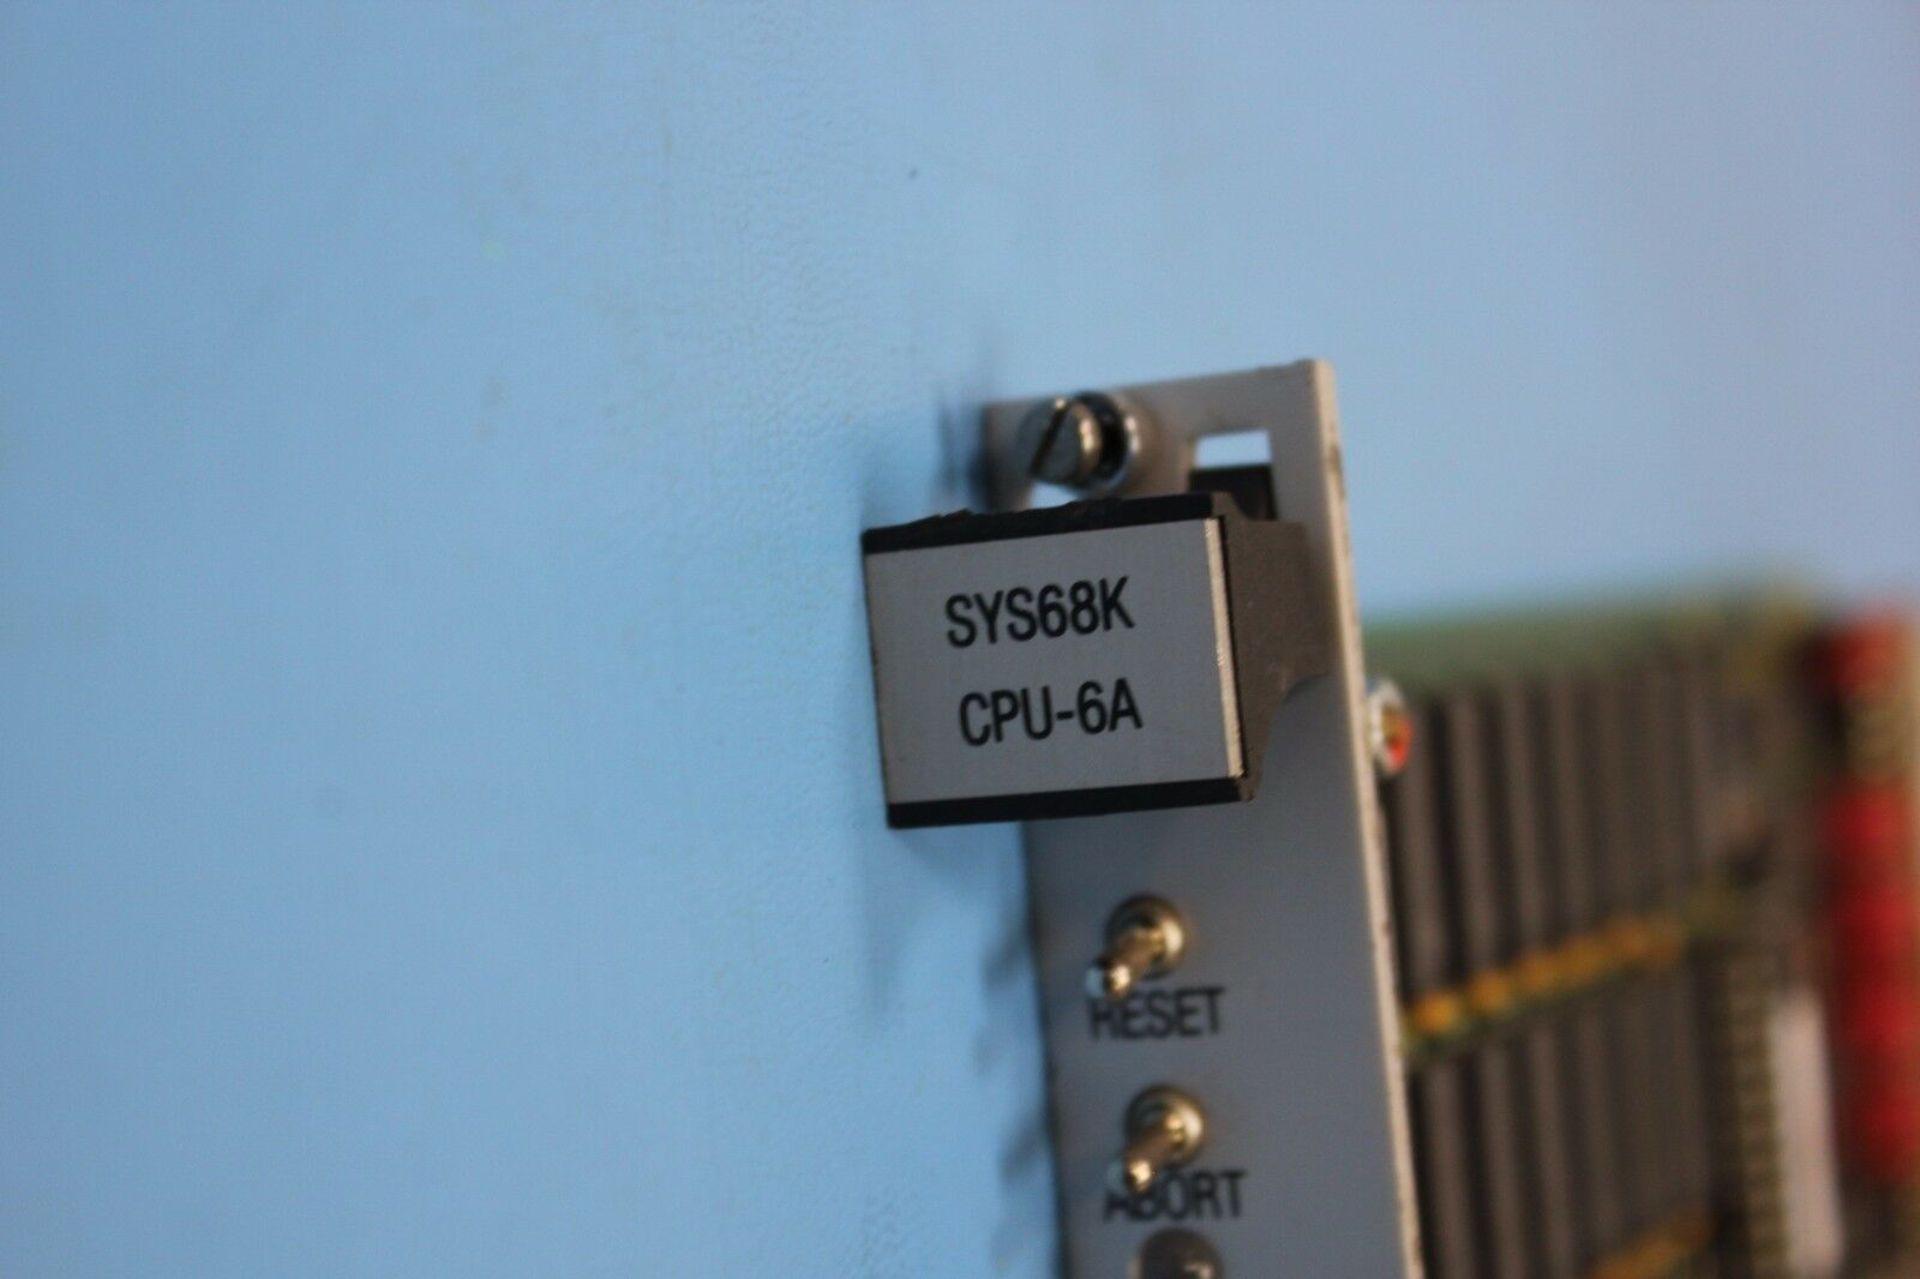 Force SYS68K CPU-6A Vme Cpu Board - Image 2 of 3